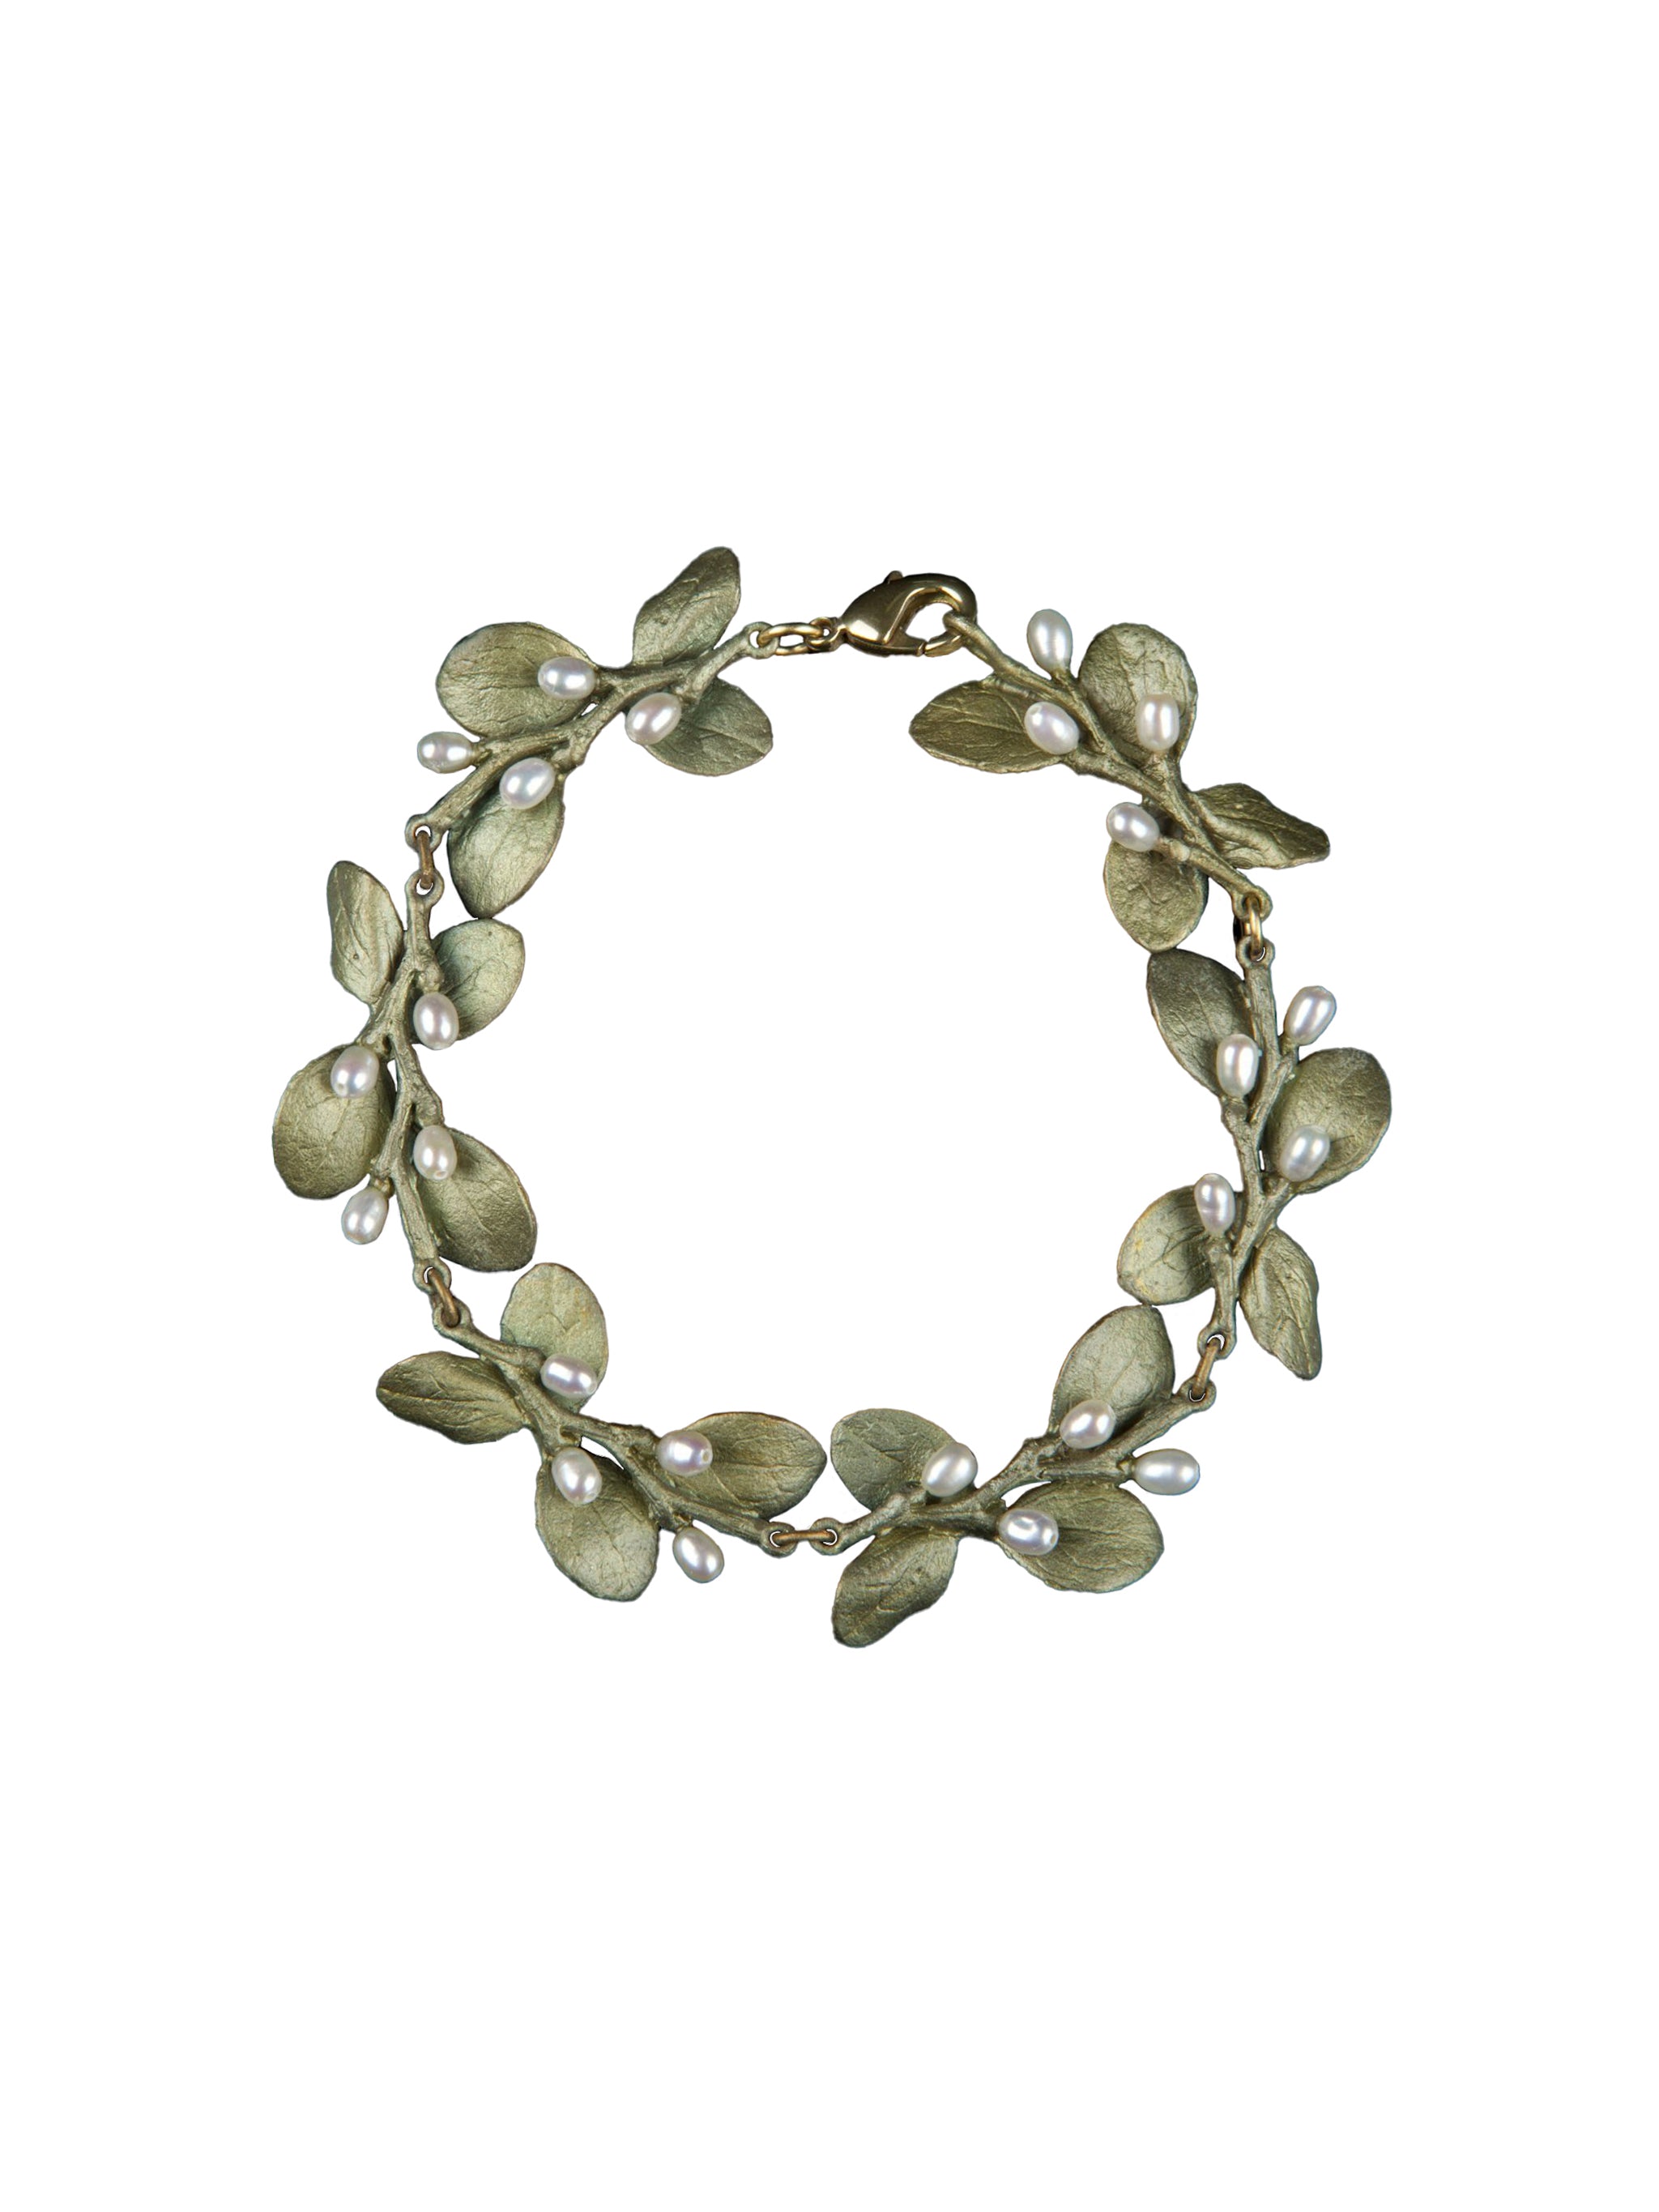 Shop the Irish Thorn Leaves Jewelry Collection at Weston Table